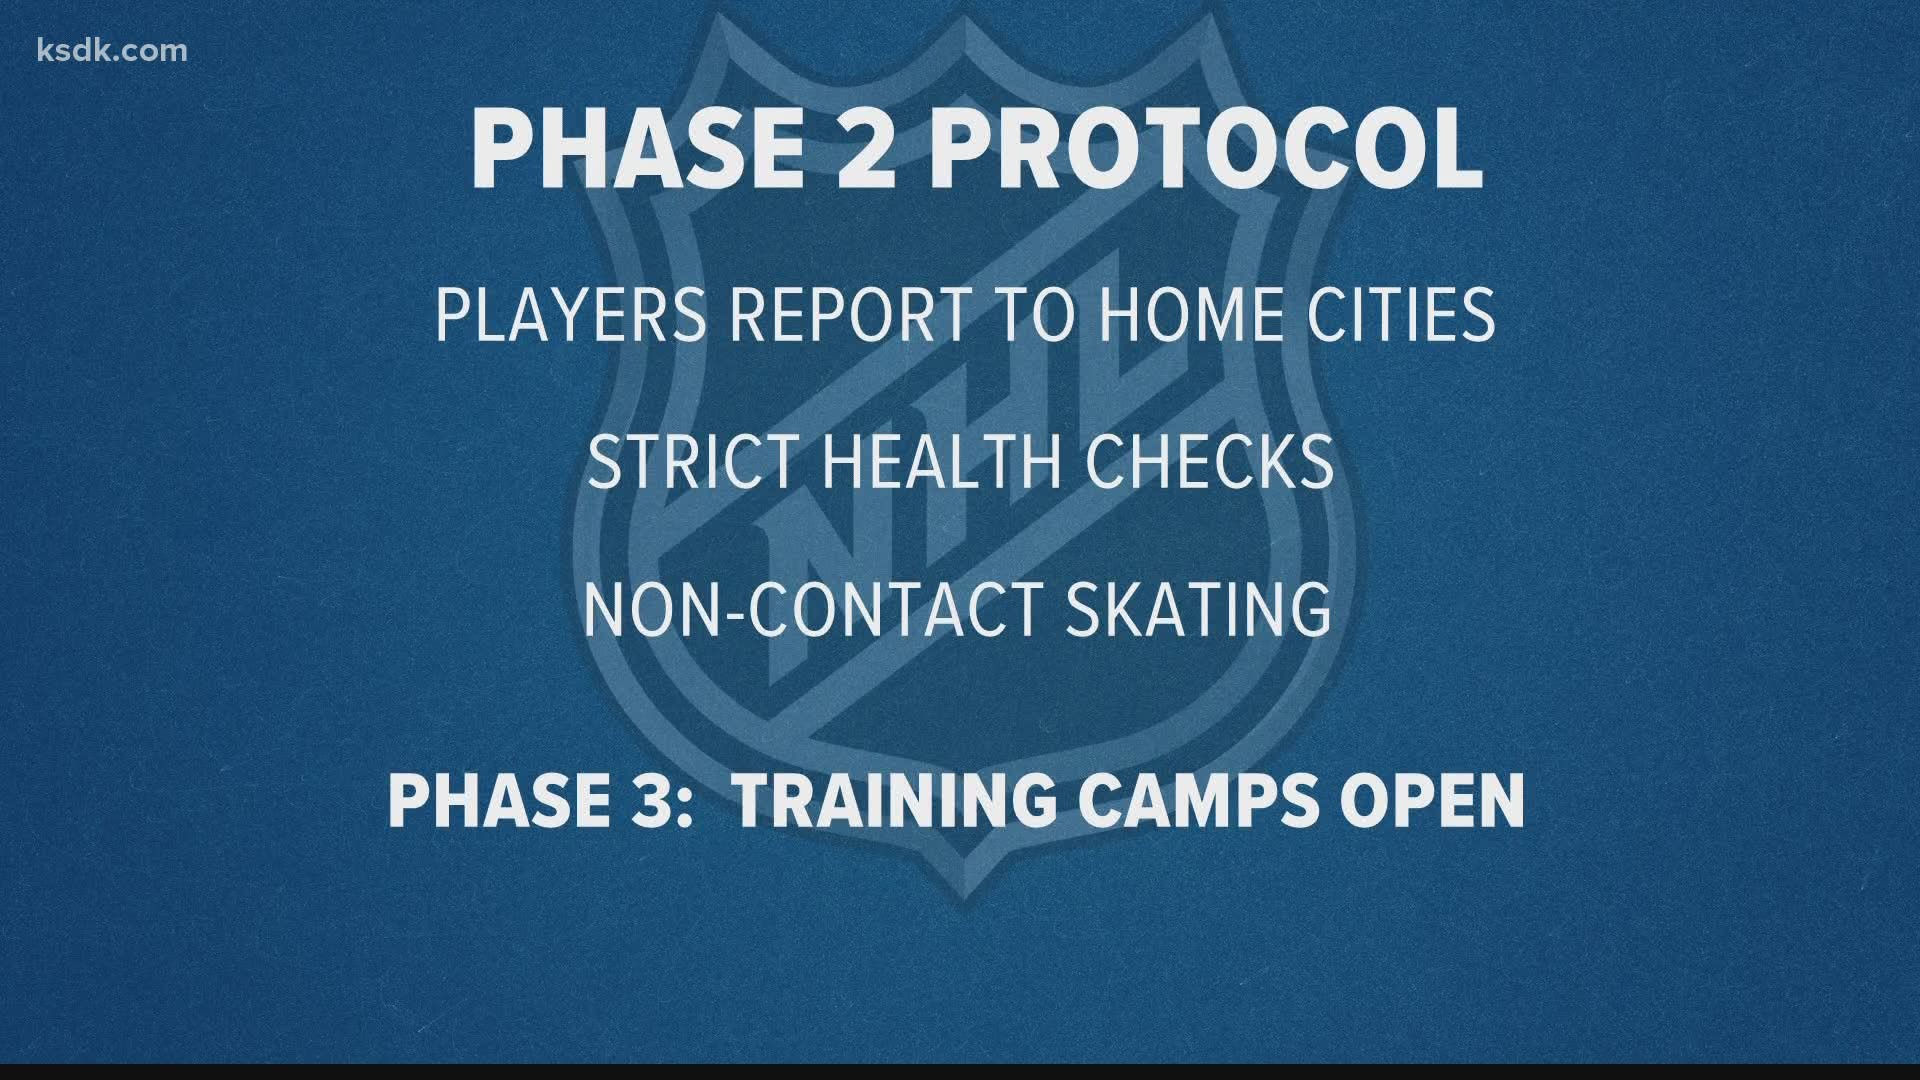 Players will need to undergo strict health checks and teams will be allowed to start up non-contact training.